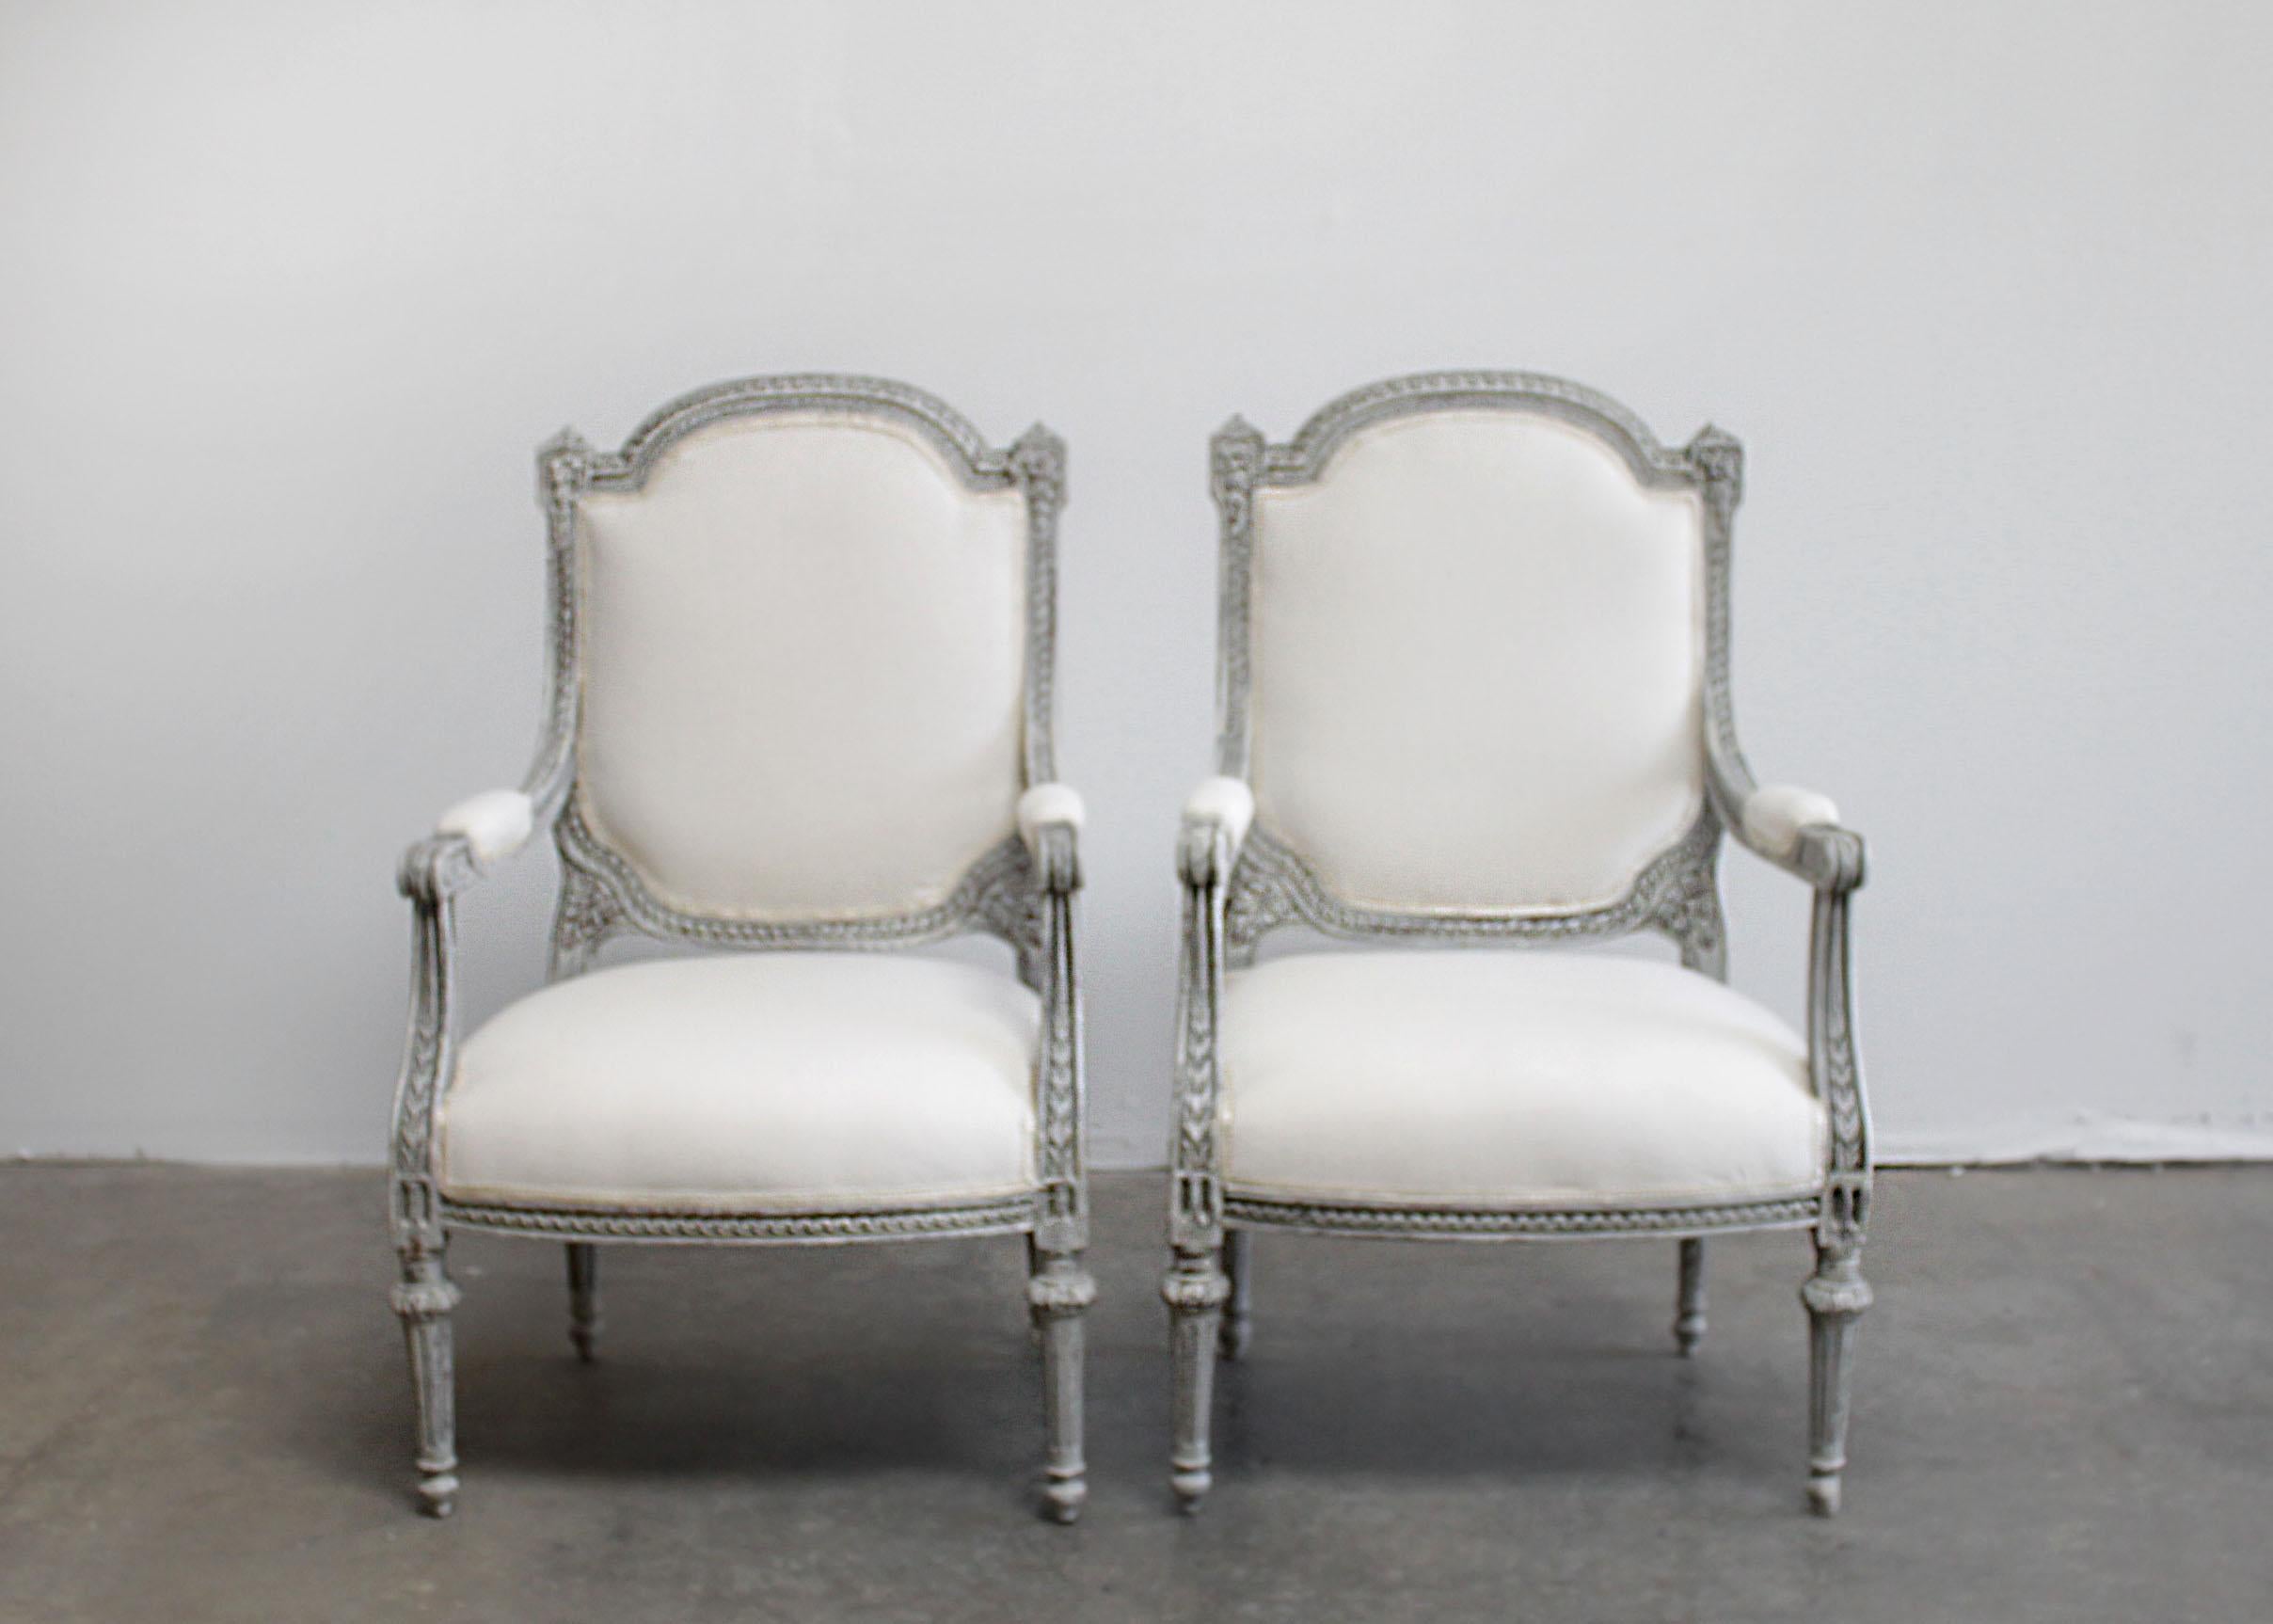 Antique Louis XVI style painted and upholstered carved open armchairs
Painted in a pretty gustavian gray finish with subtle distressed edges, and wood peeking through the paint.
Classic fluted legs, with medallion carvings atop the leg, and egg